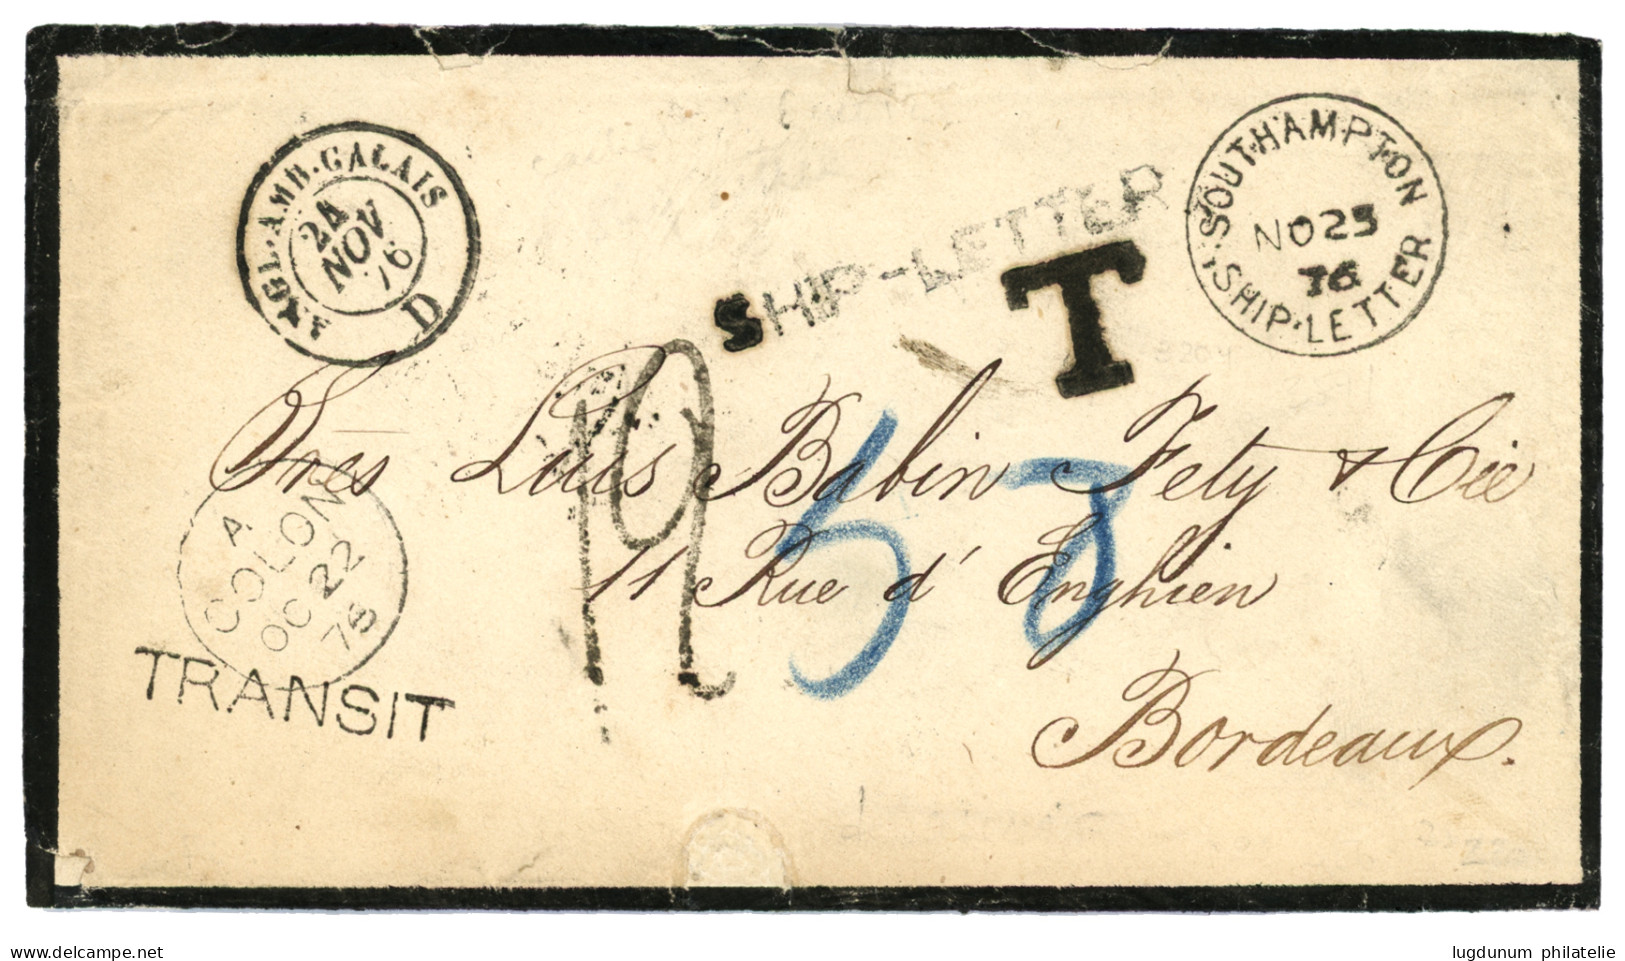 COLOMBIA : 1876 TRANSIT + COLON + SOUTHAMPTON SHIP LETTER + SHIP-LETTER + T + 12 Tax Marking On Envelope From CARTAGENA  - Colombie